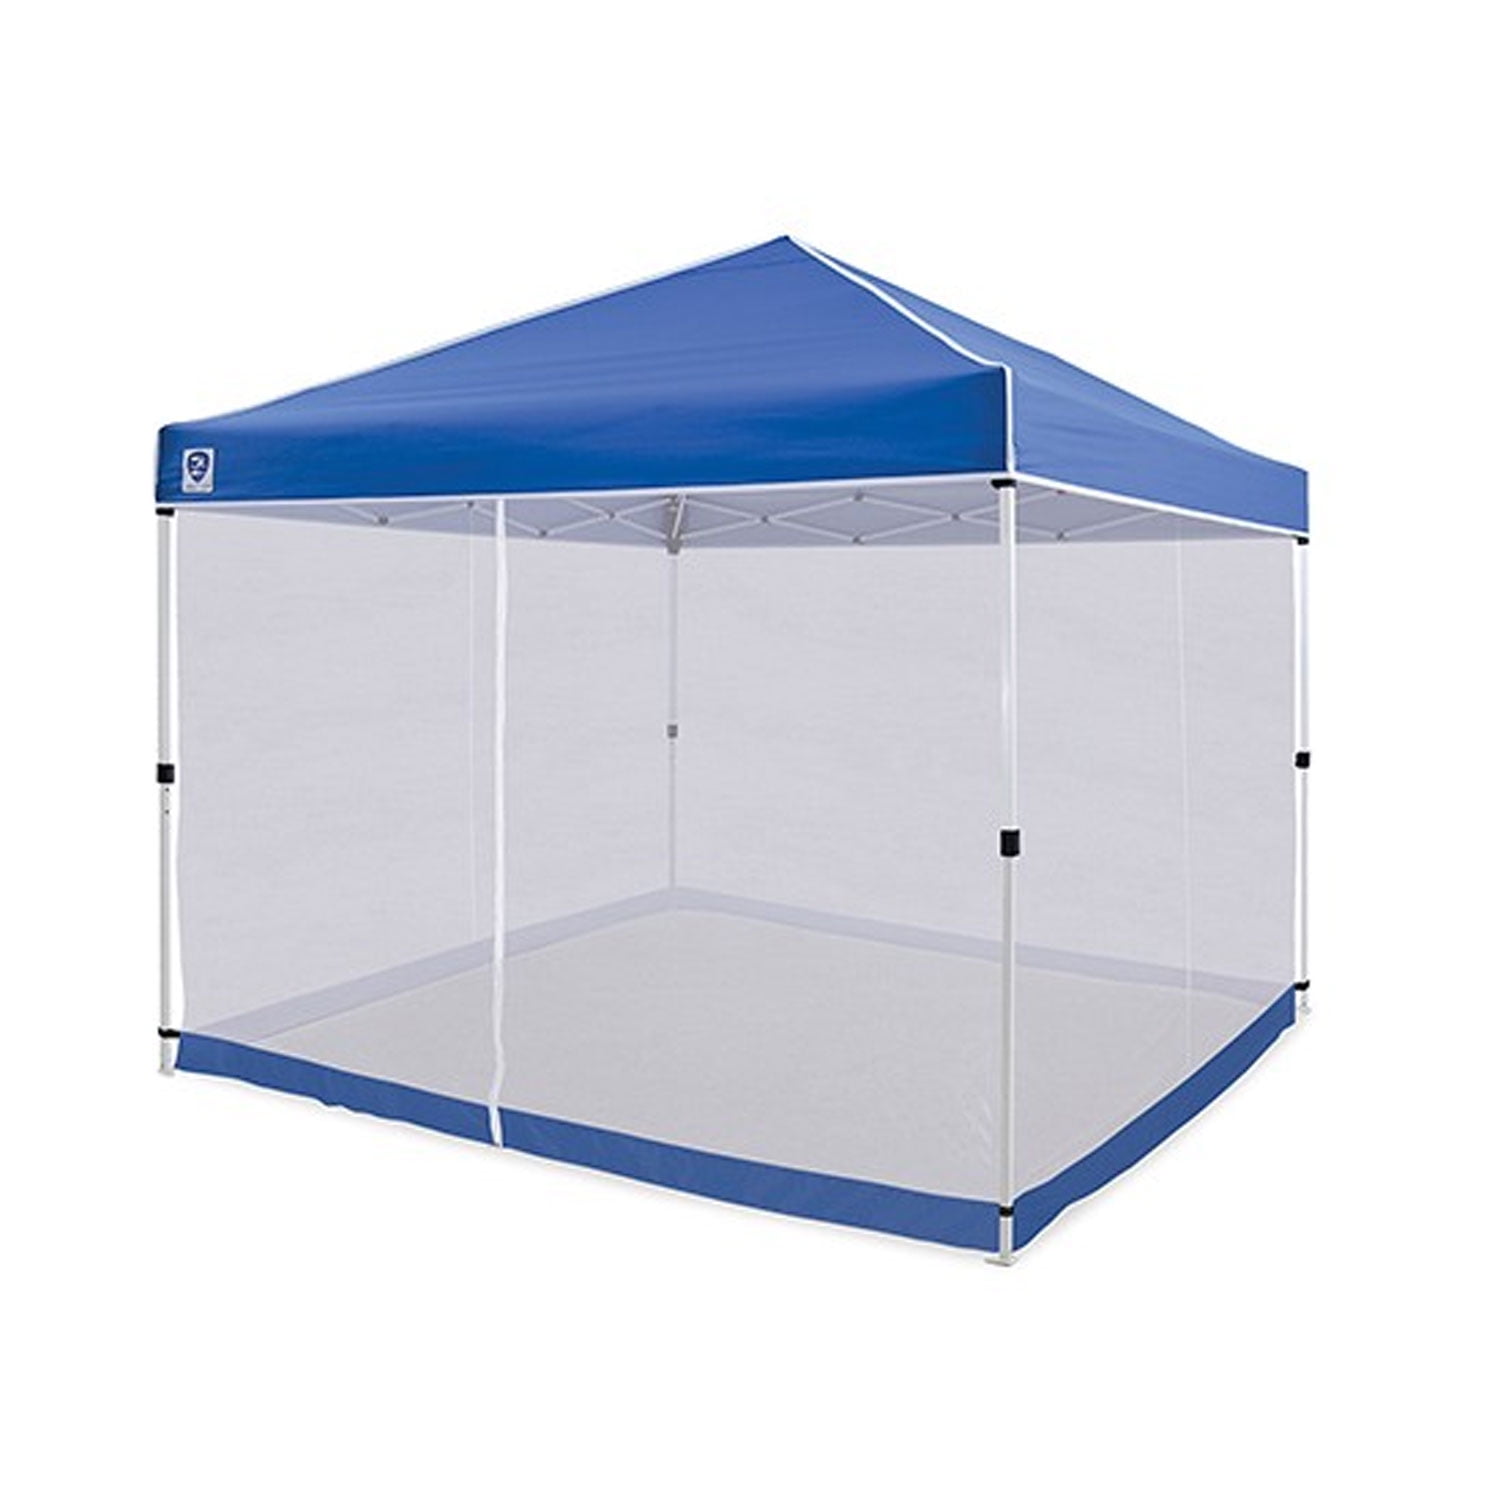 White Z-Shade 10' x 12' Event Canopy Walls Canopy Sold Separately 